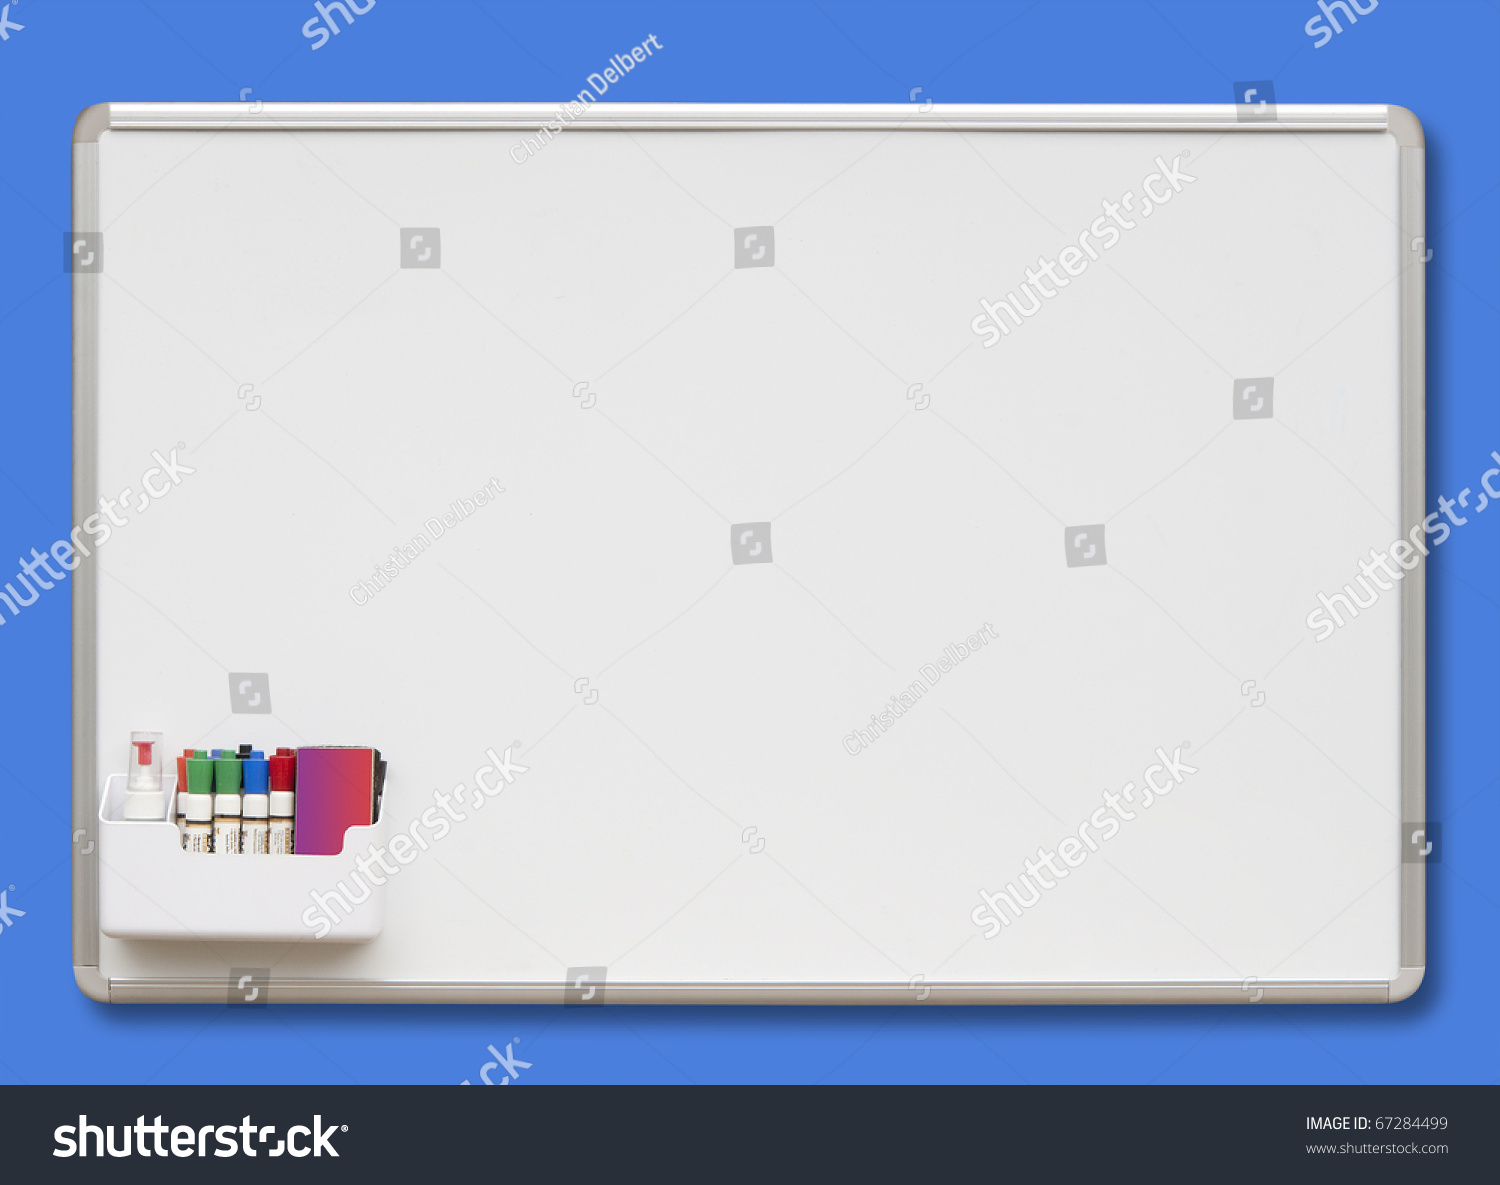 stock photo white board with colored markers isolated with shadow and clipping path 67284499